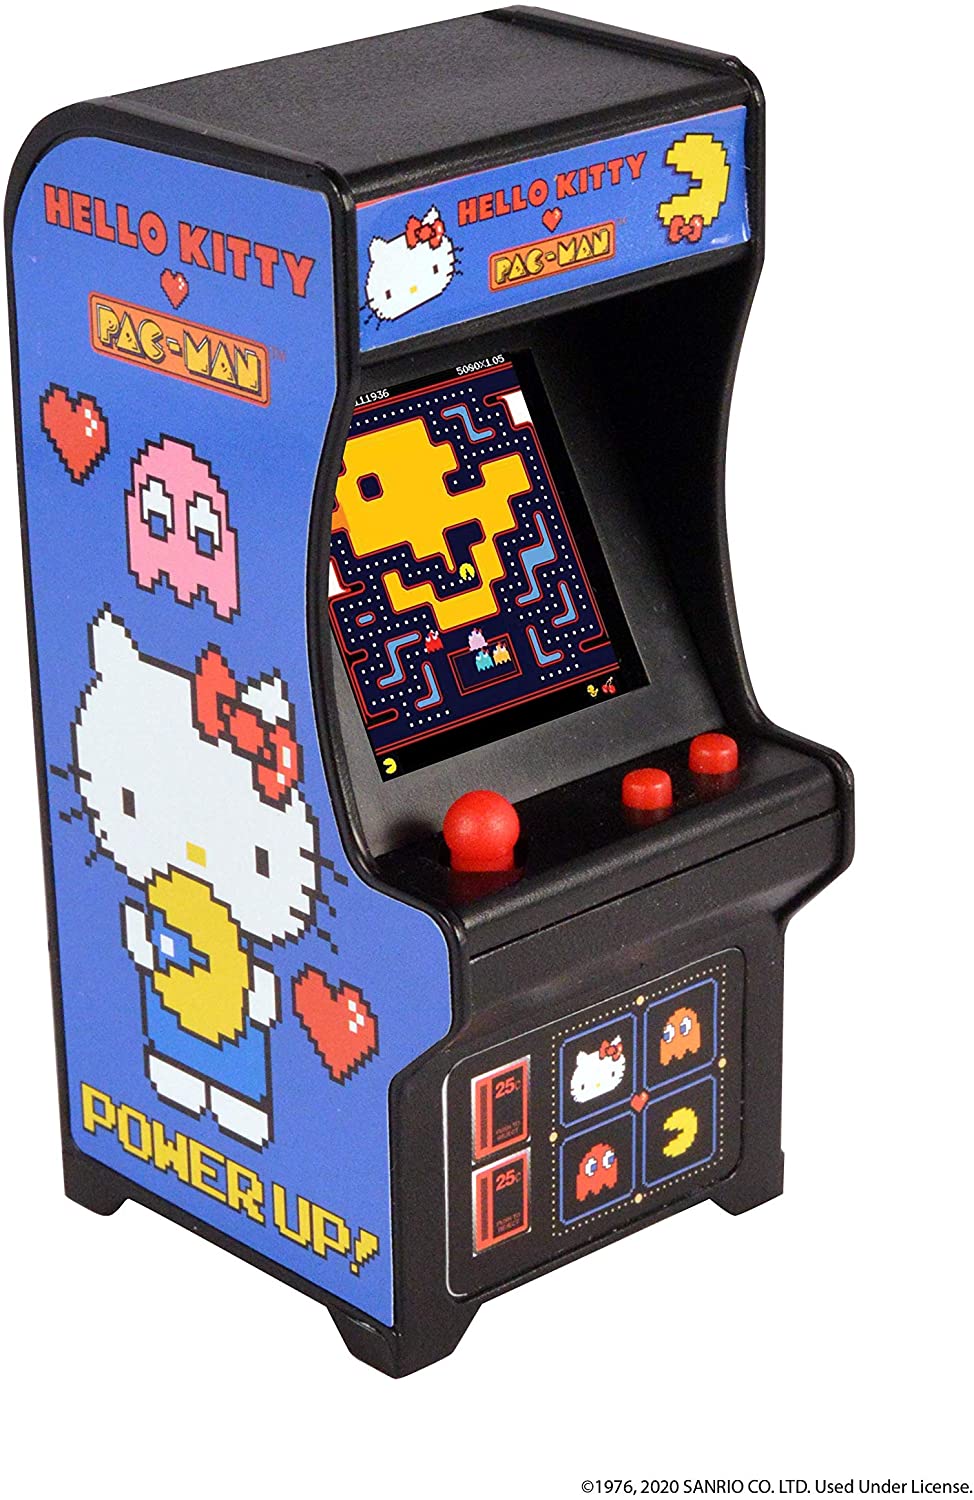 Tiny Arcade Games Boxed: Pac-Man - Galaxian - Space Invaders - Ms Pac-Man